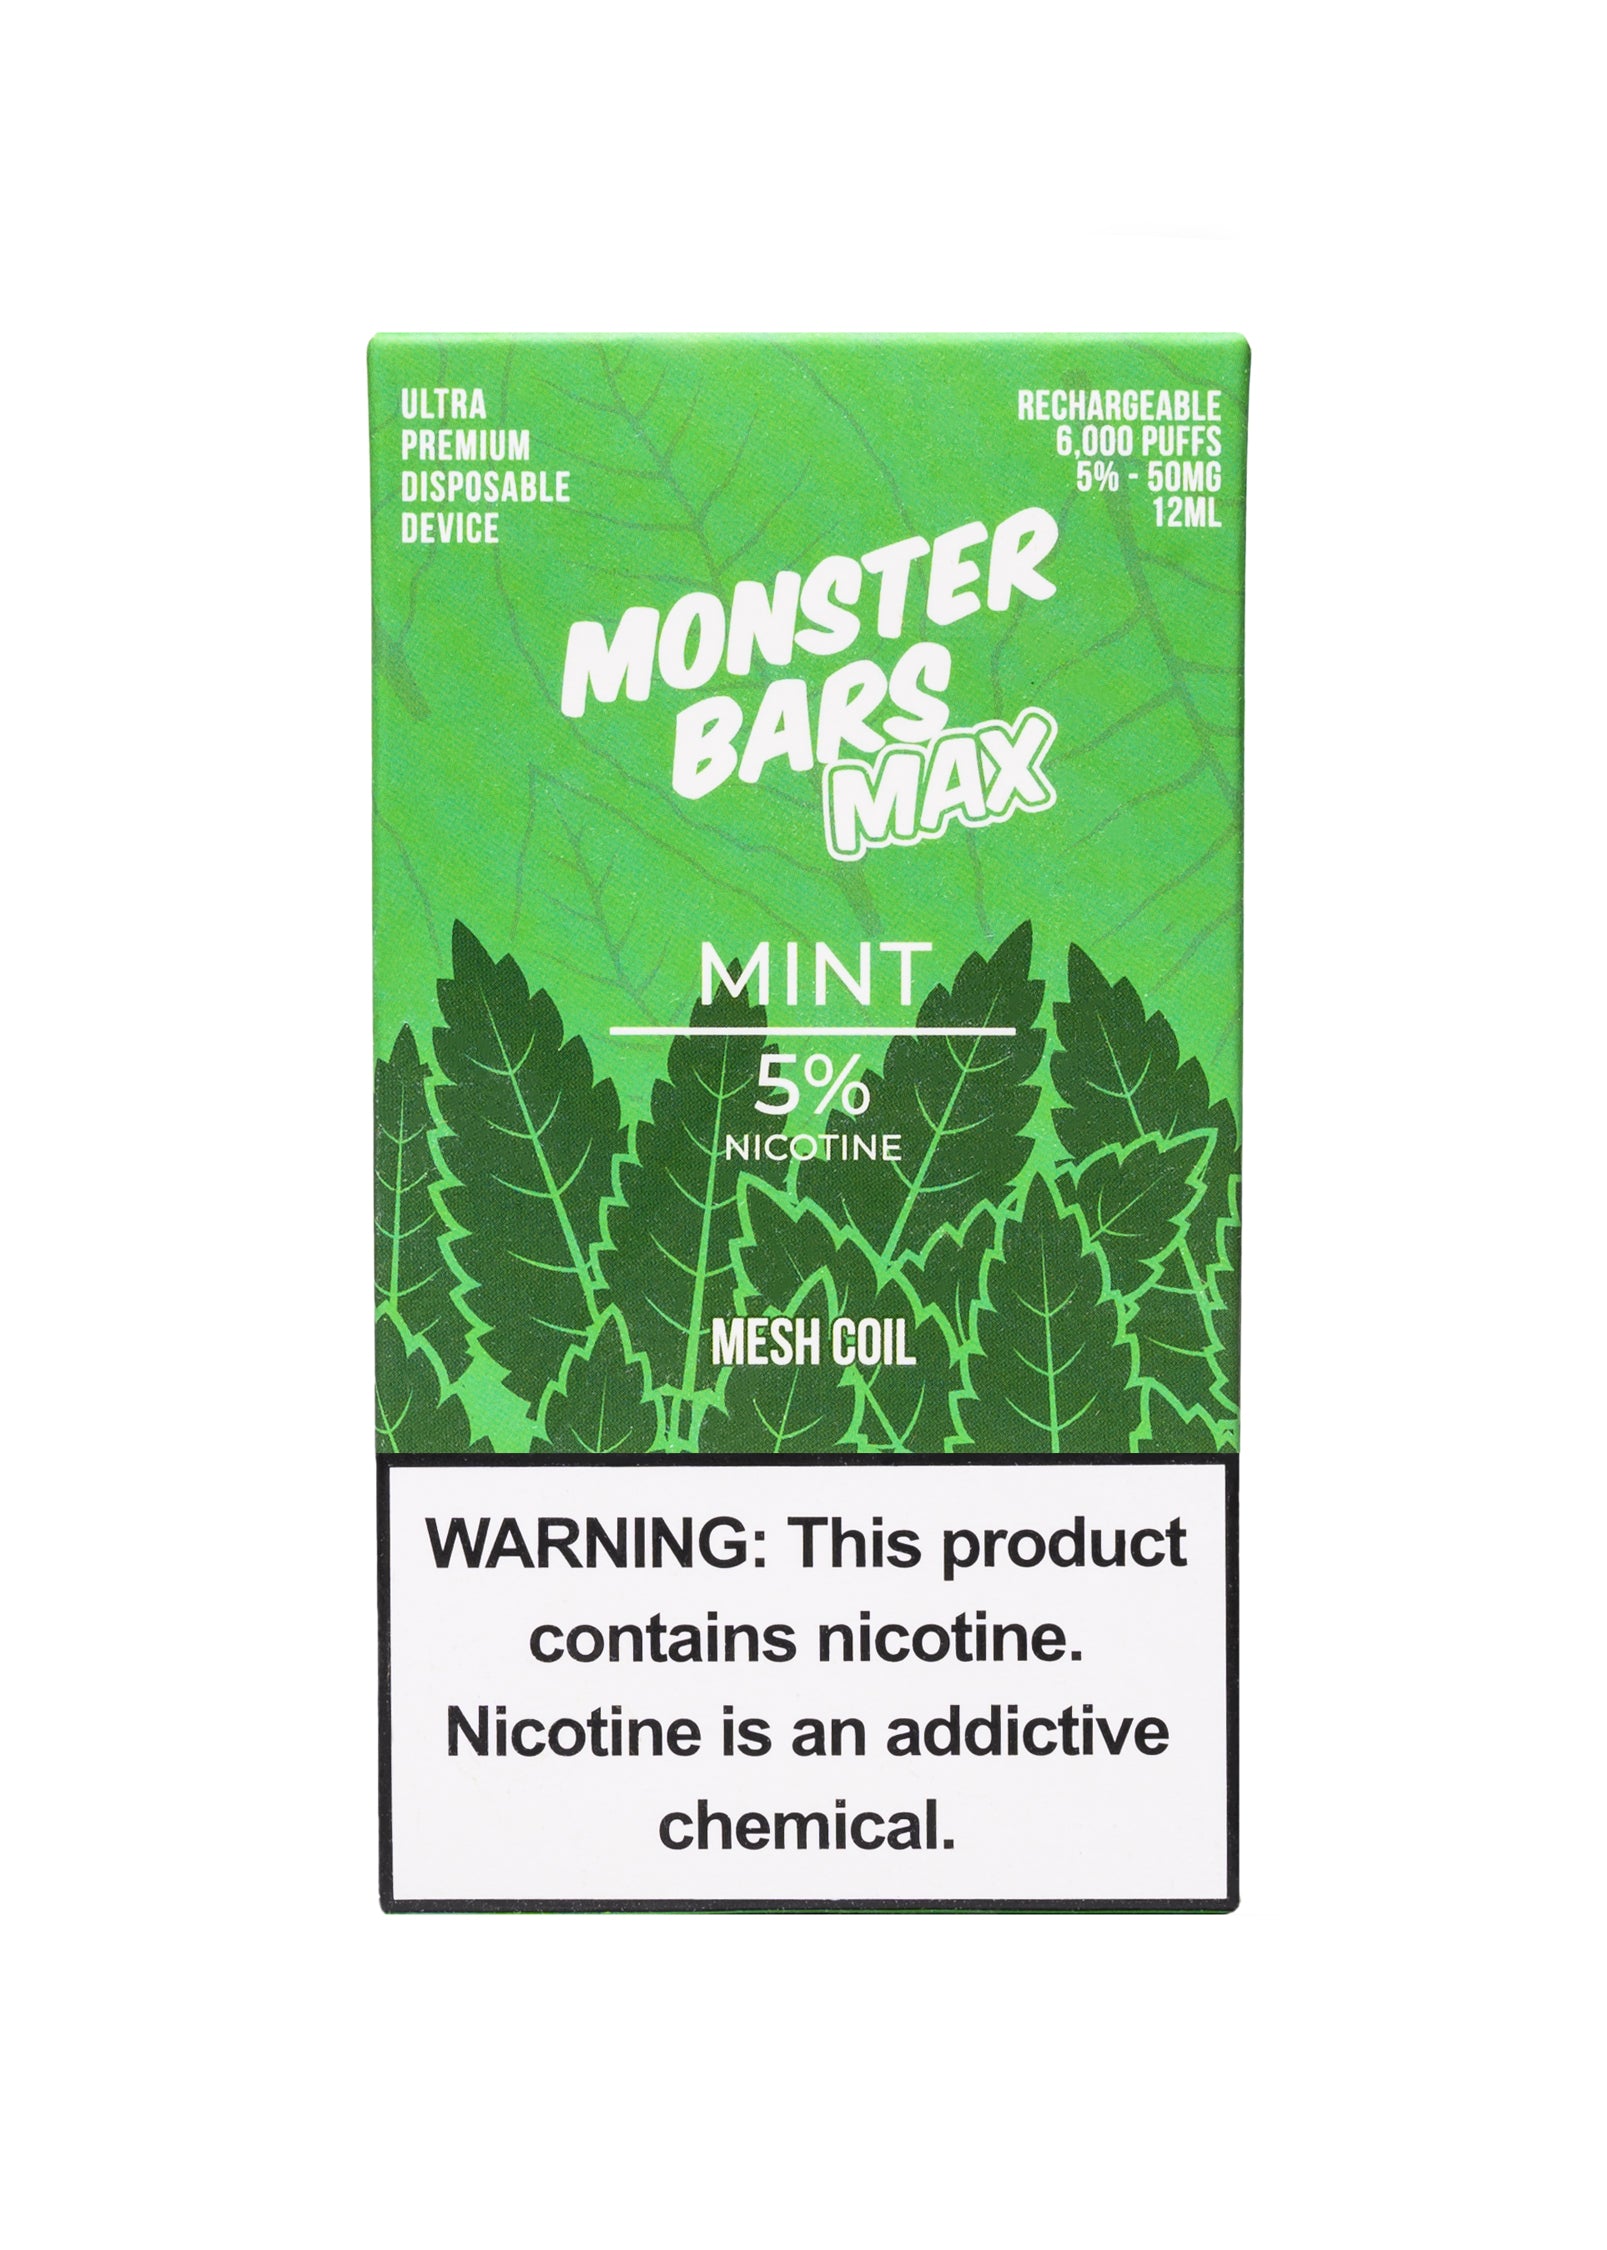 Monster Bars MAX 6000 Disposable, 6000 Puffs